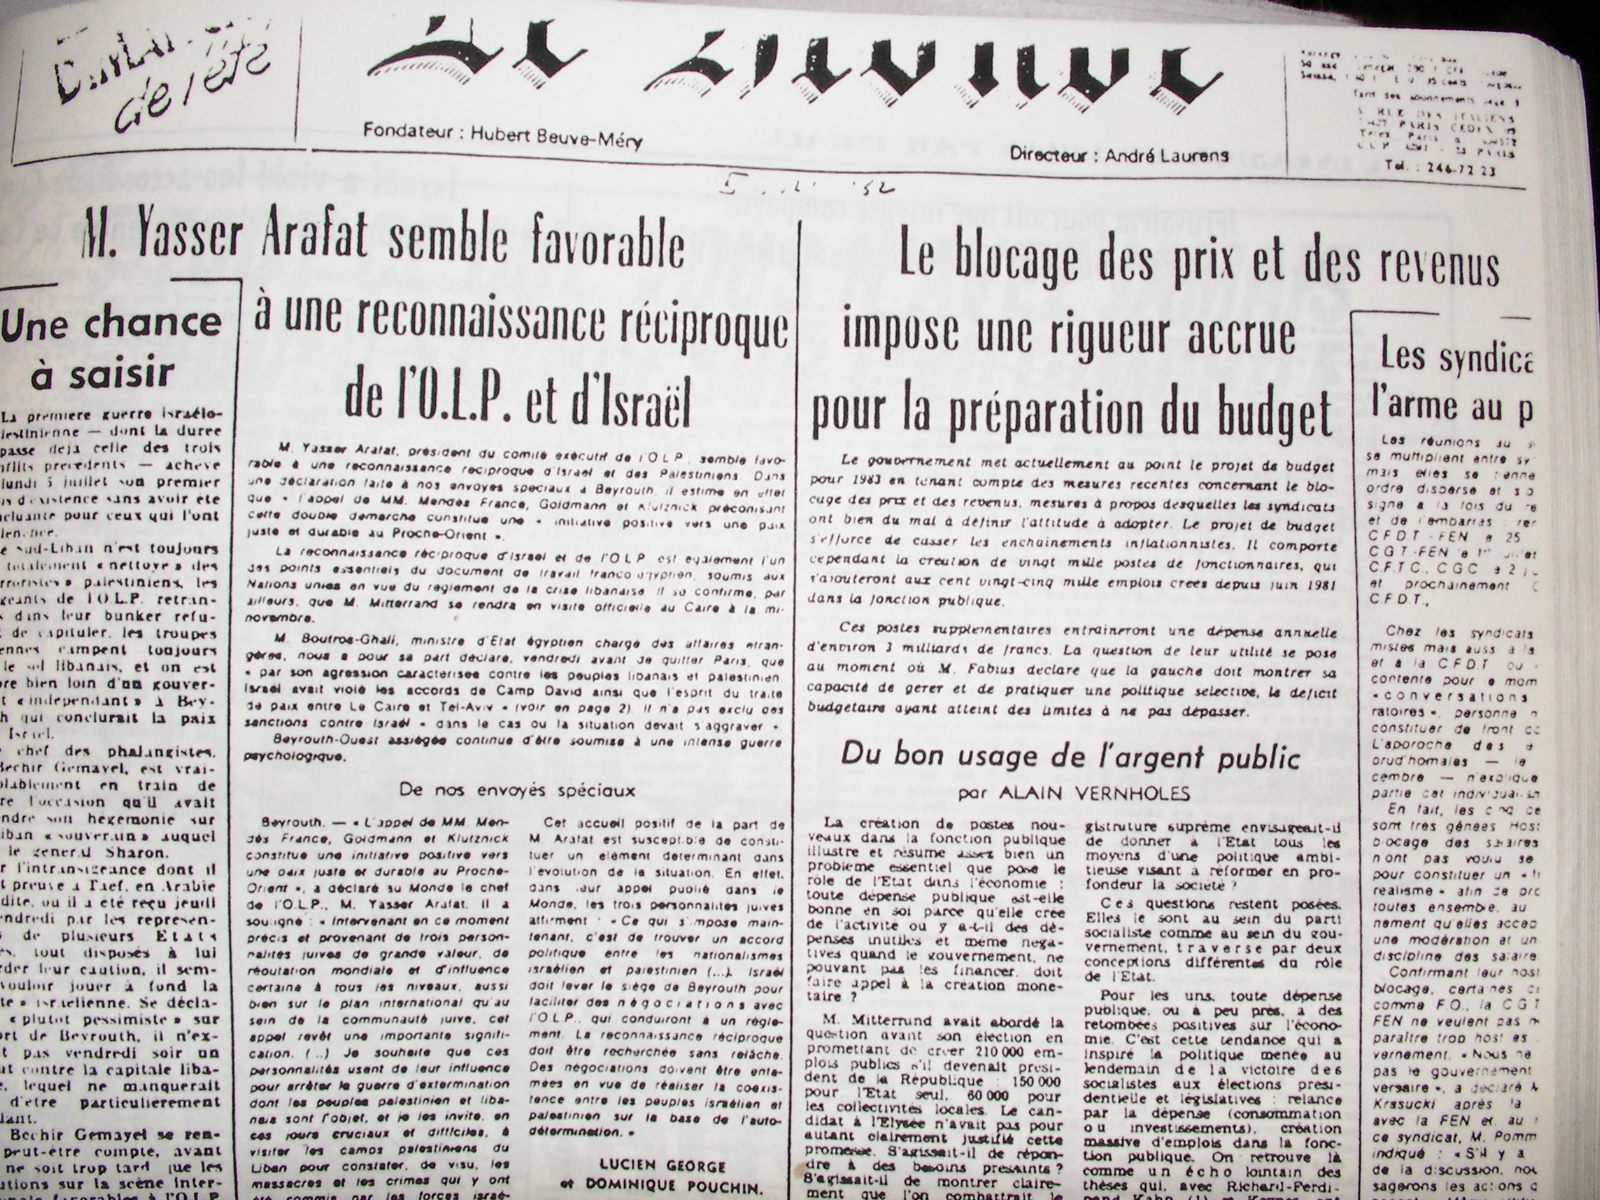 THE PARIS DECLARATION - As first published in LeMonde & Liberation